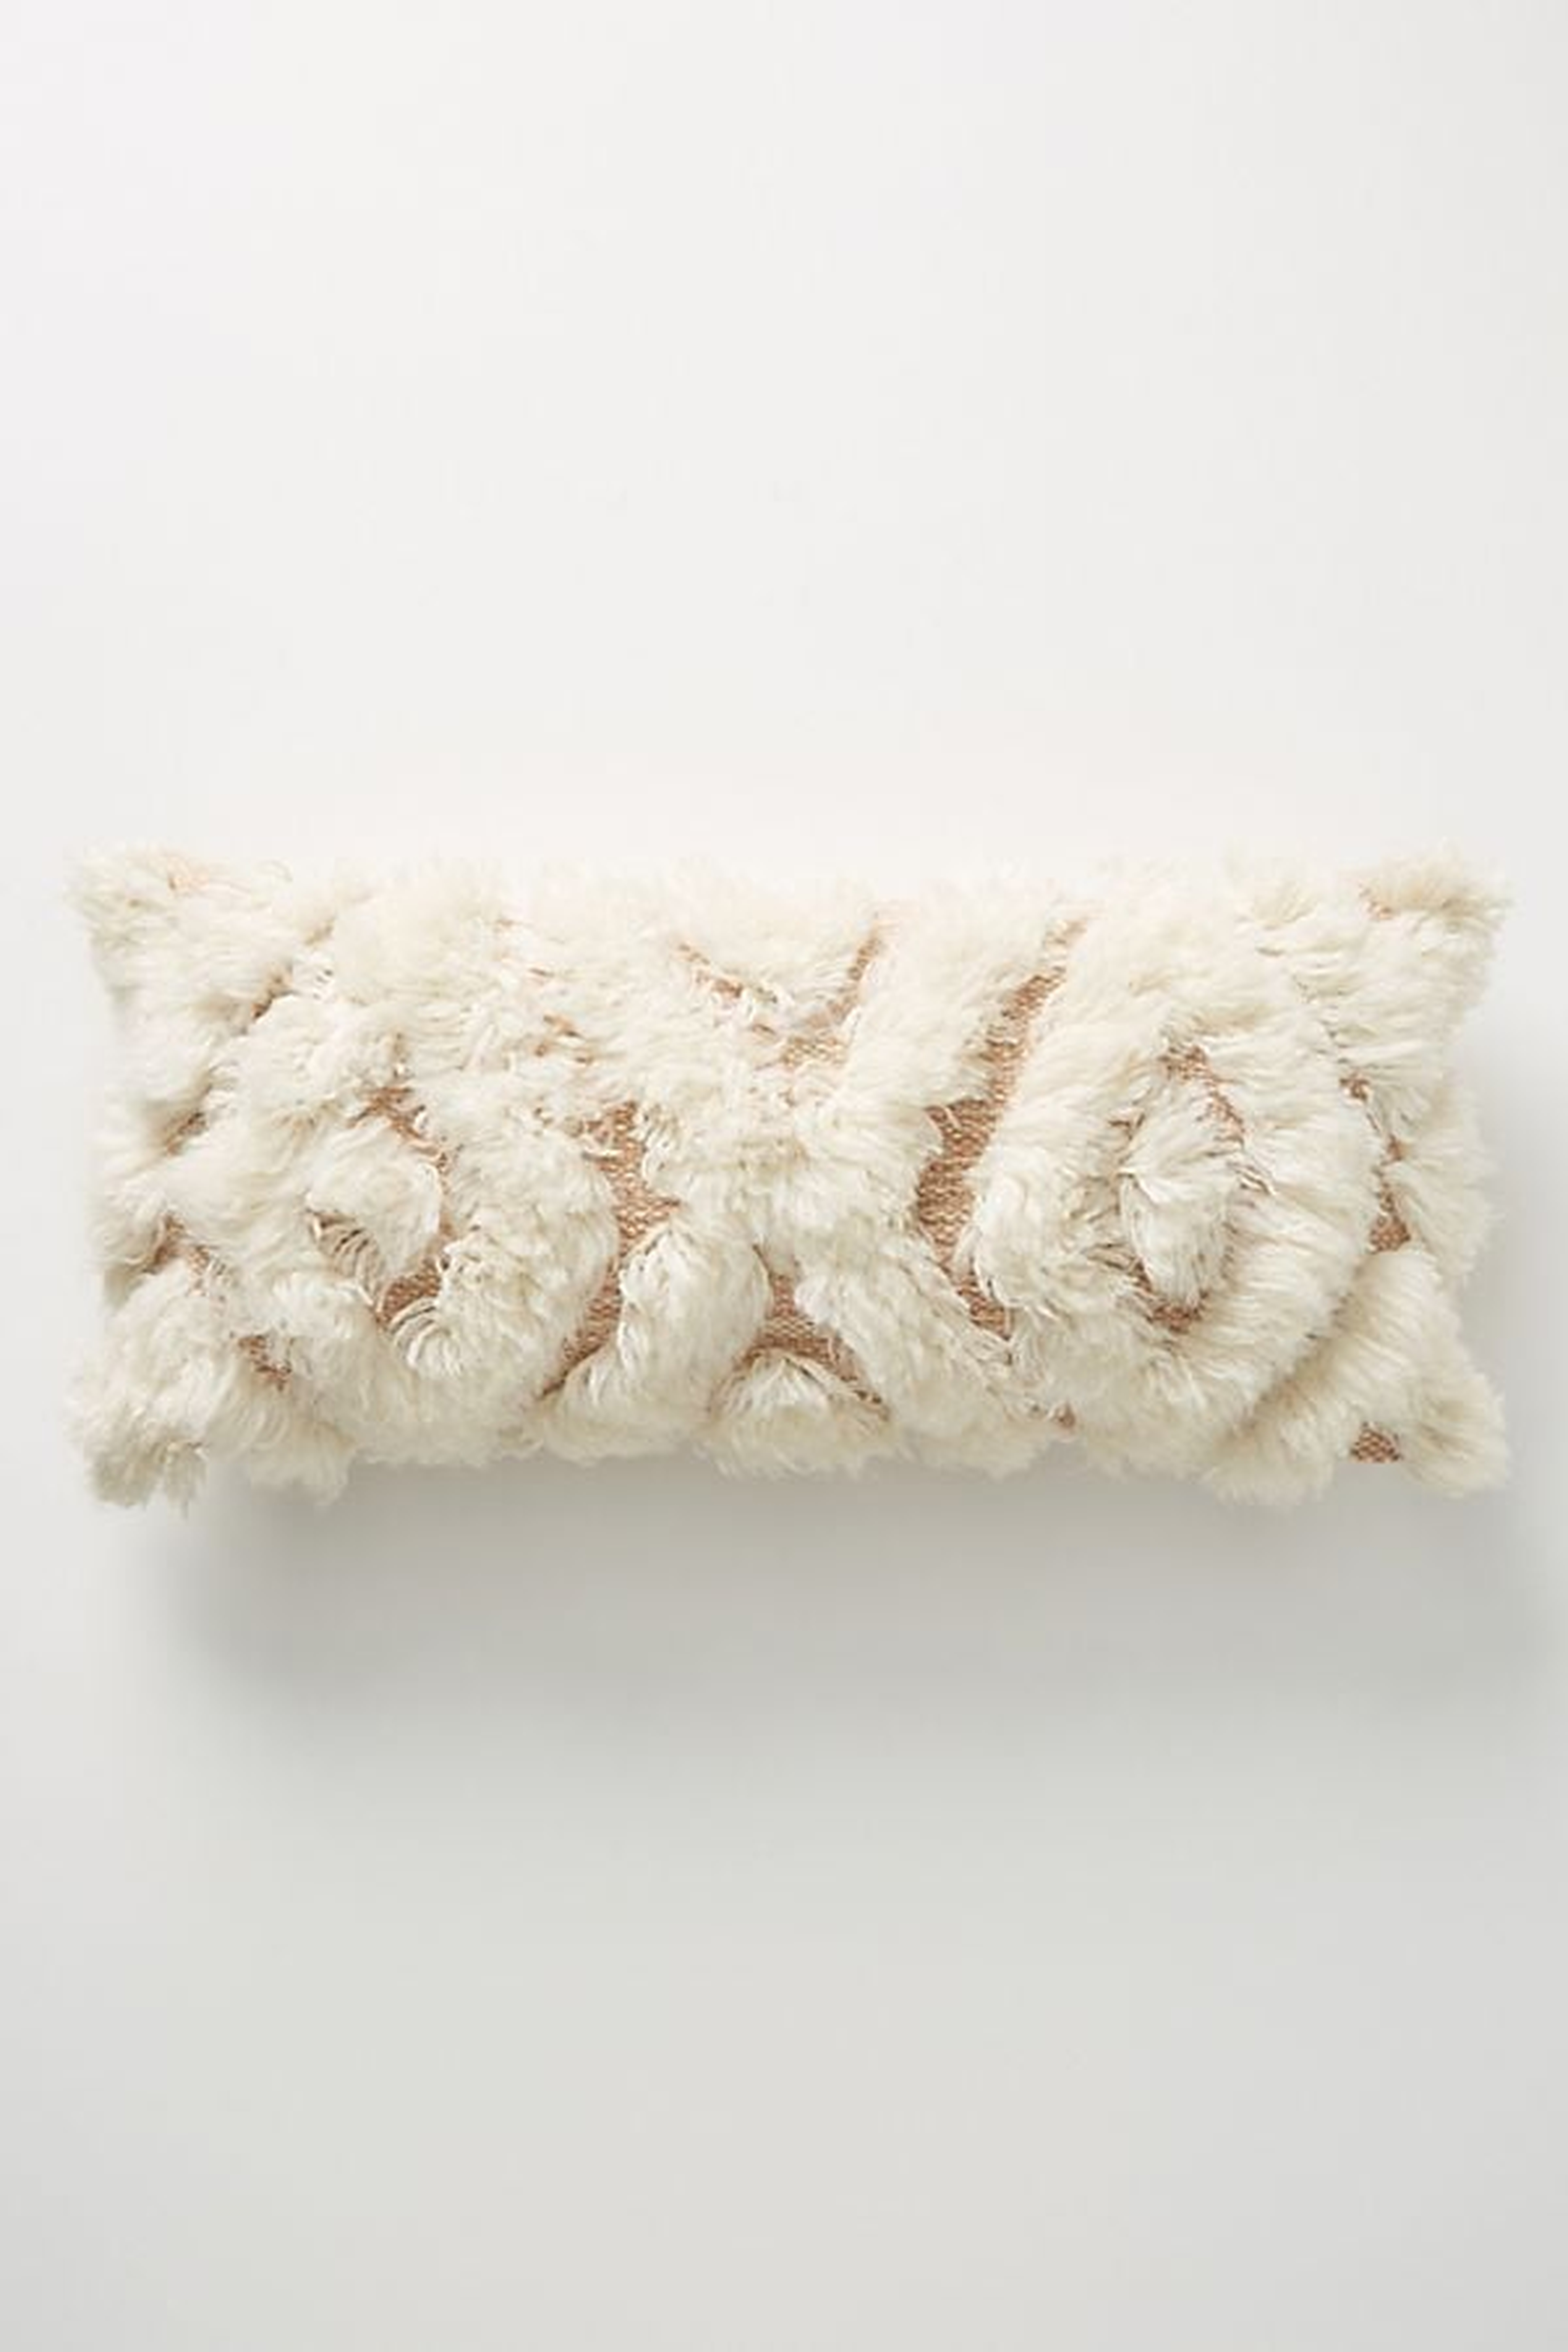 Joanna Gaines for Anthropologie Wool Camille Lumbar Pillow - Anthropologie